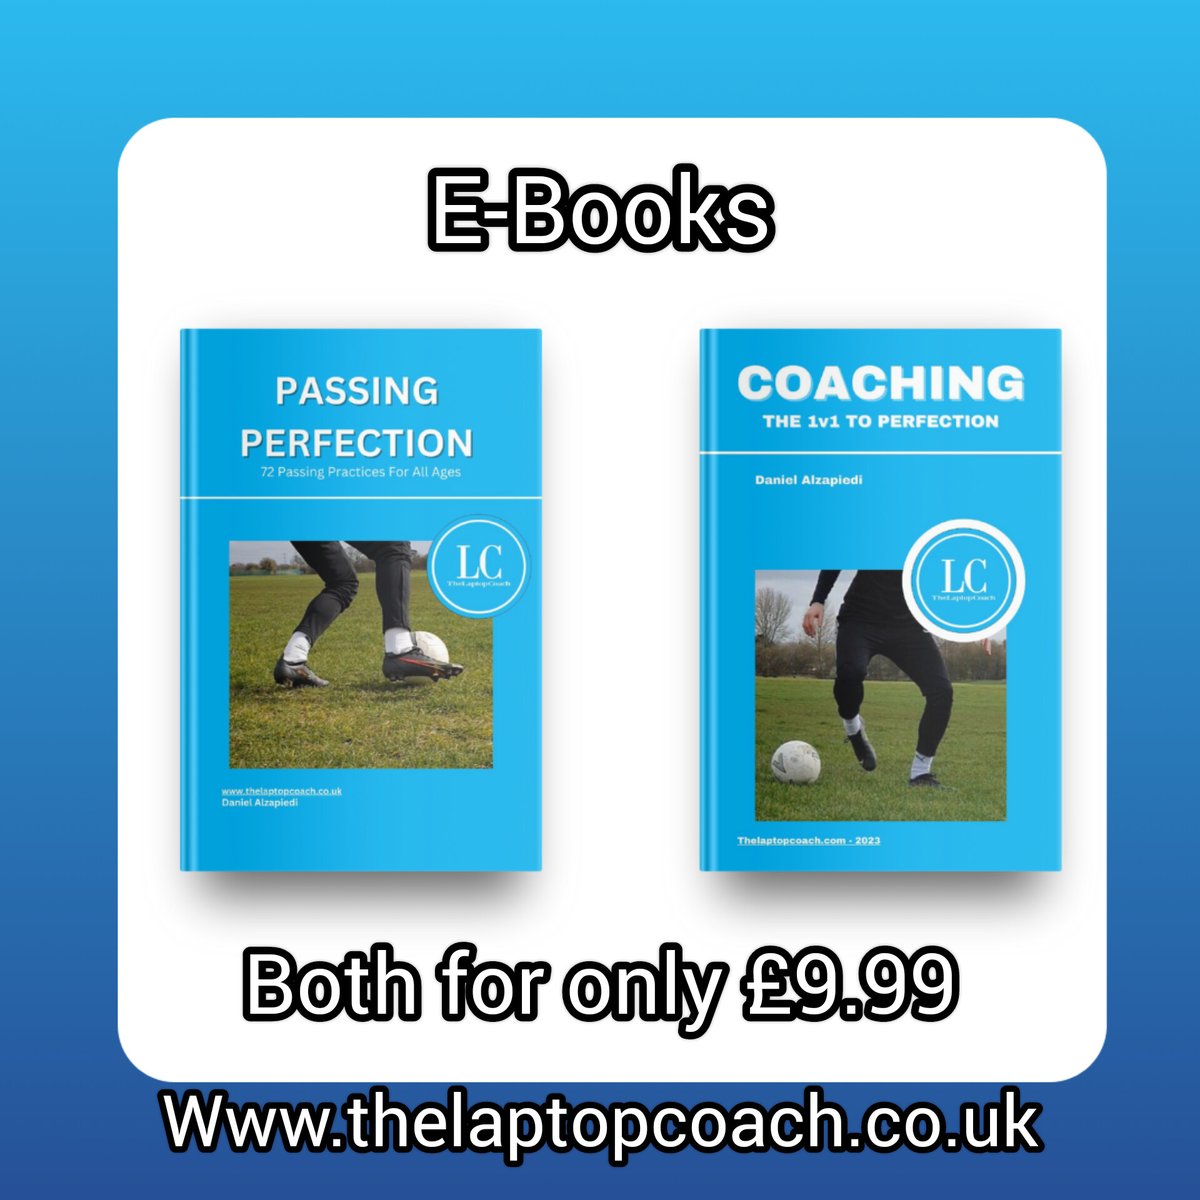 📚 E-Books available! 🤩Only £9.99 🛍 Visit our online store to get yours now! thelaptopcoach.co.uk